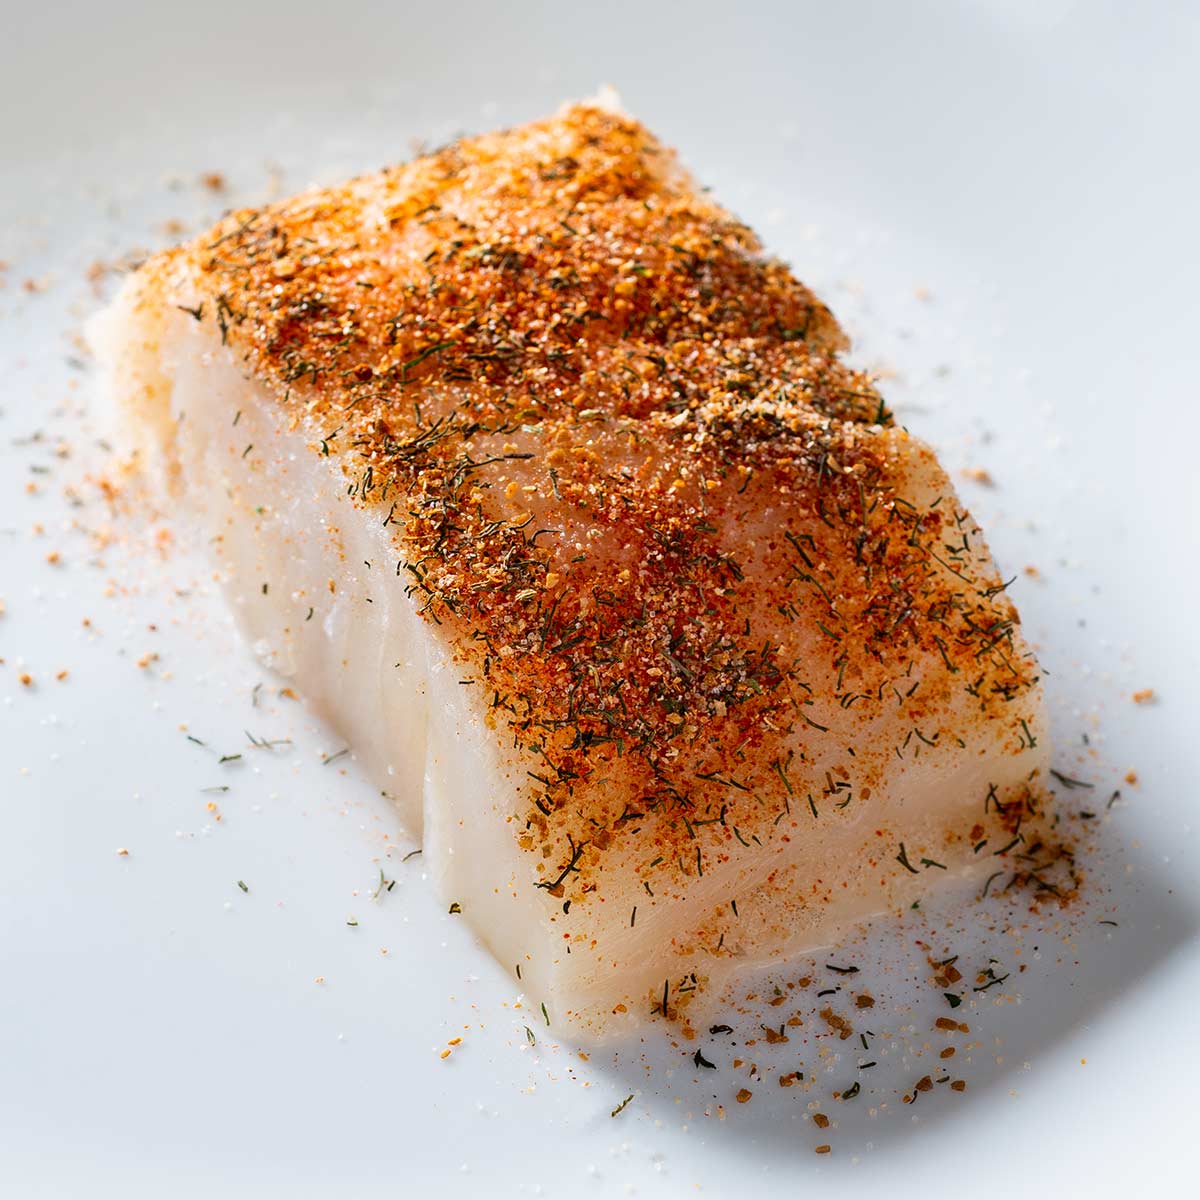 A raw, spice-rubbed cod fillet on a plate.